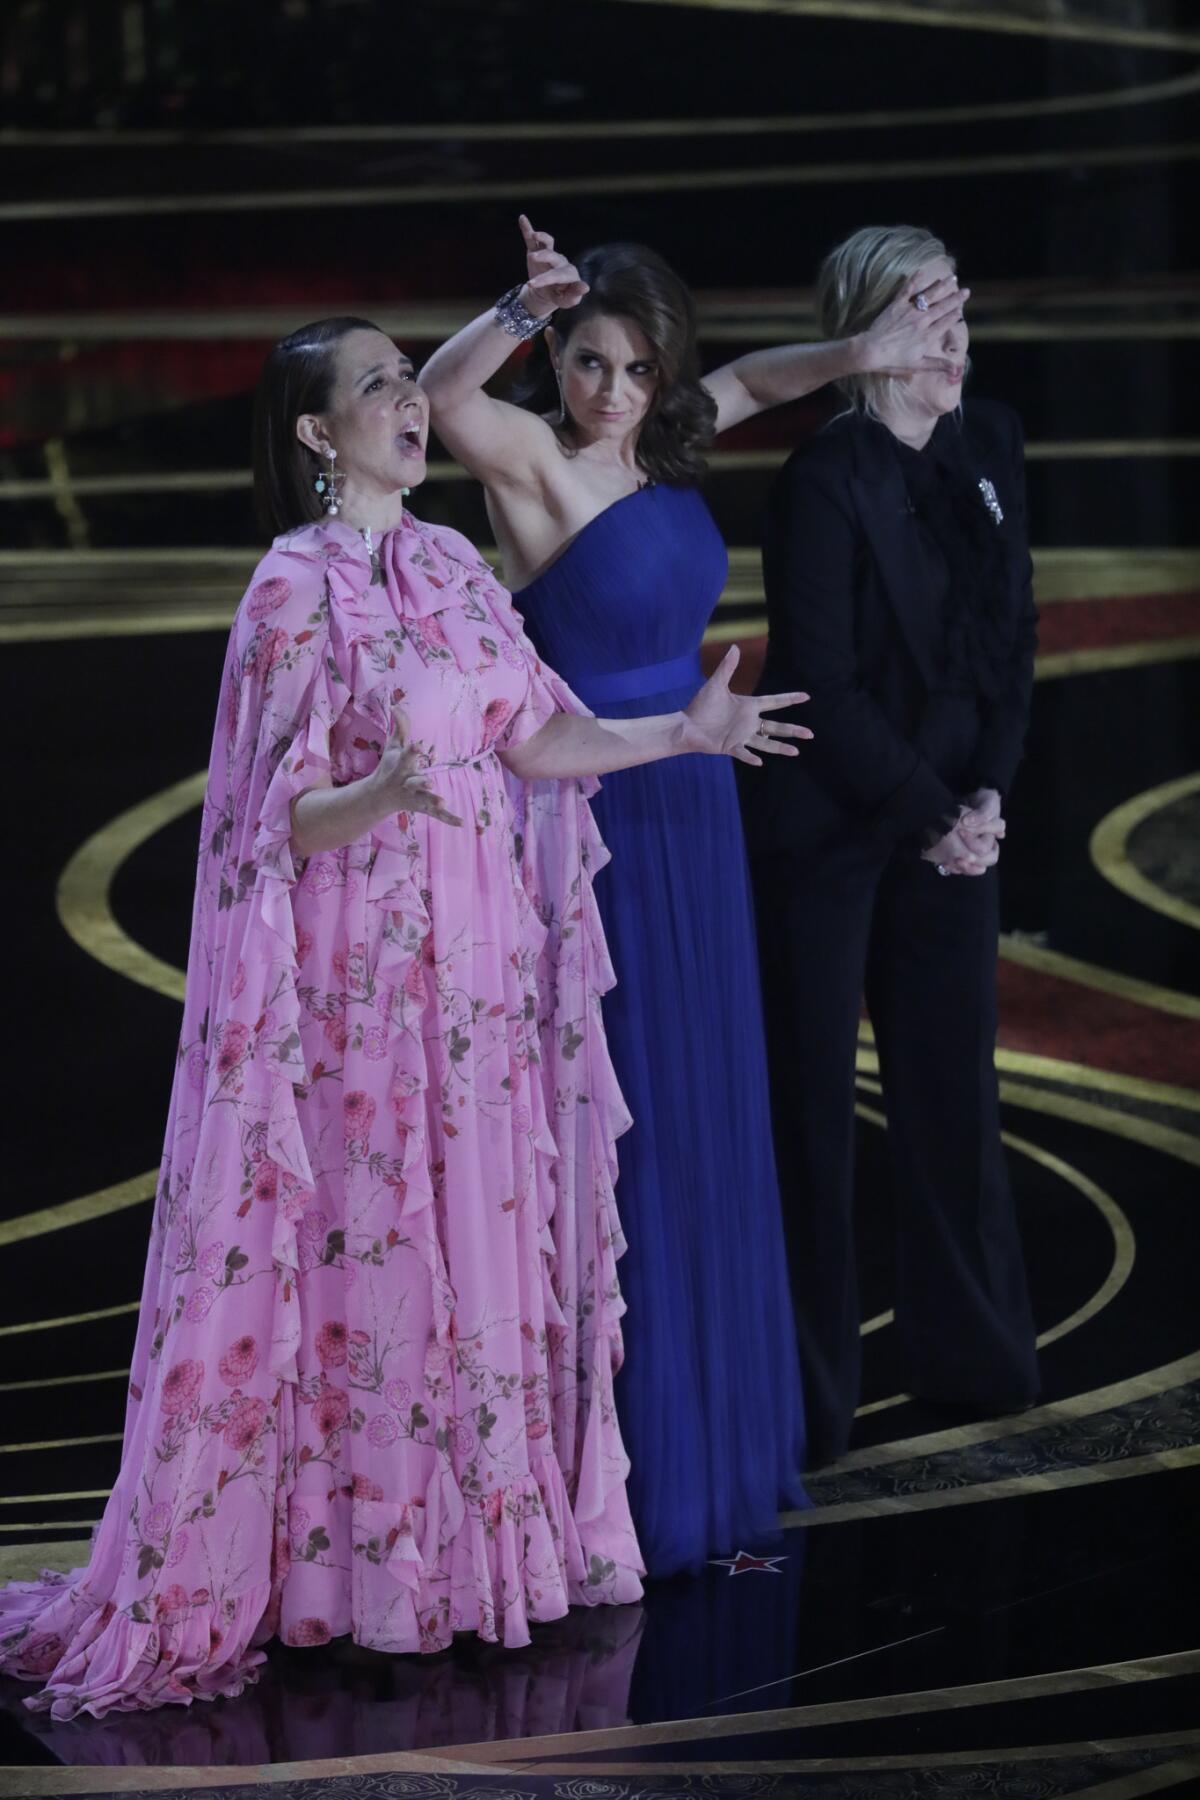 No-host opening presenters, from left, Maya Rudolph, Tina Fey and Amy Poehler at the 91st Academy Awards.